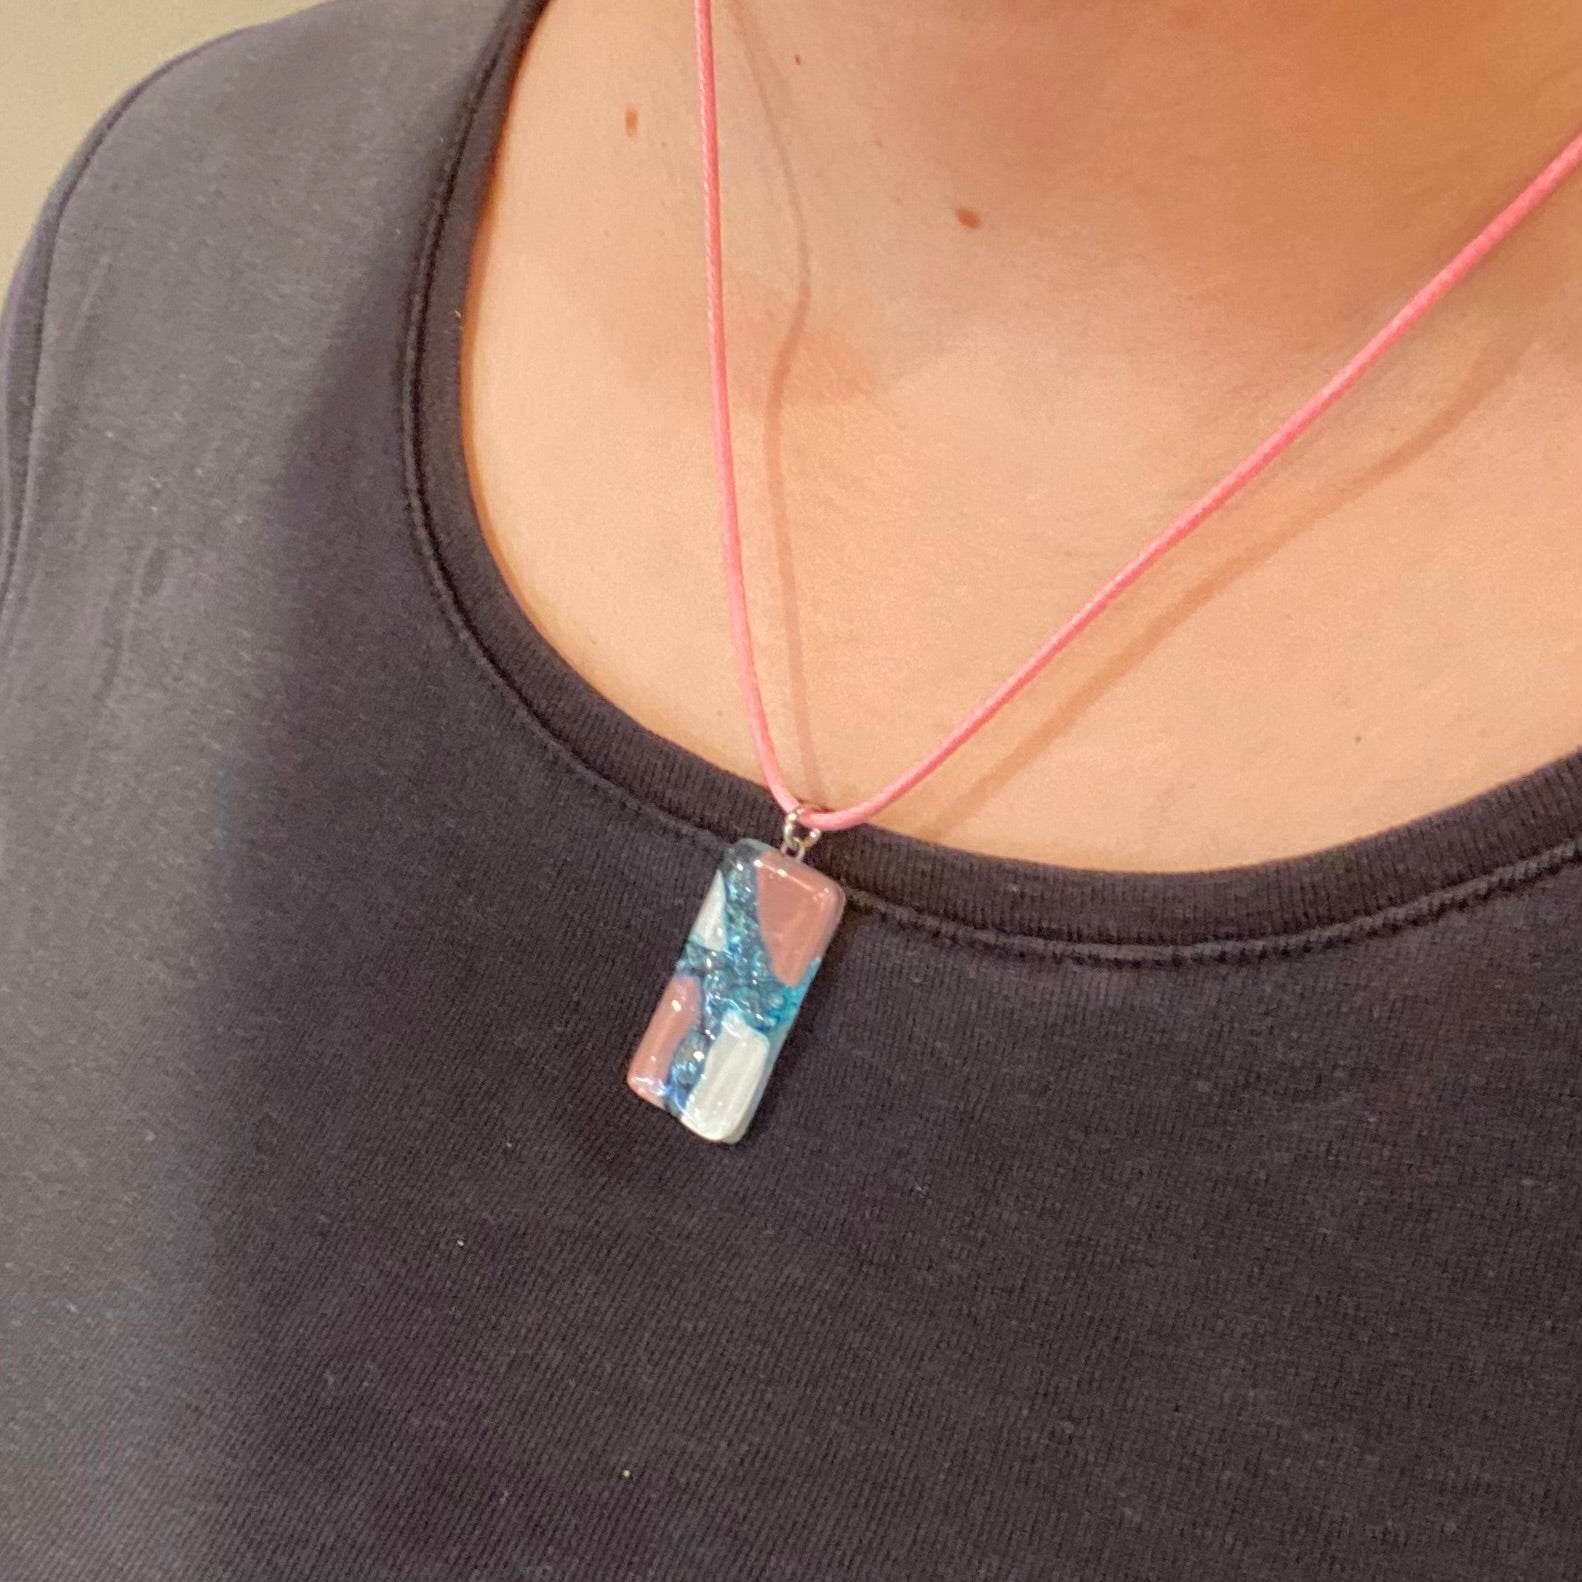 Pink and Blue Bubble Glass Rectangle Pendant - Bumble Living